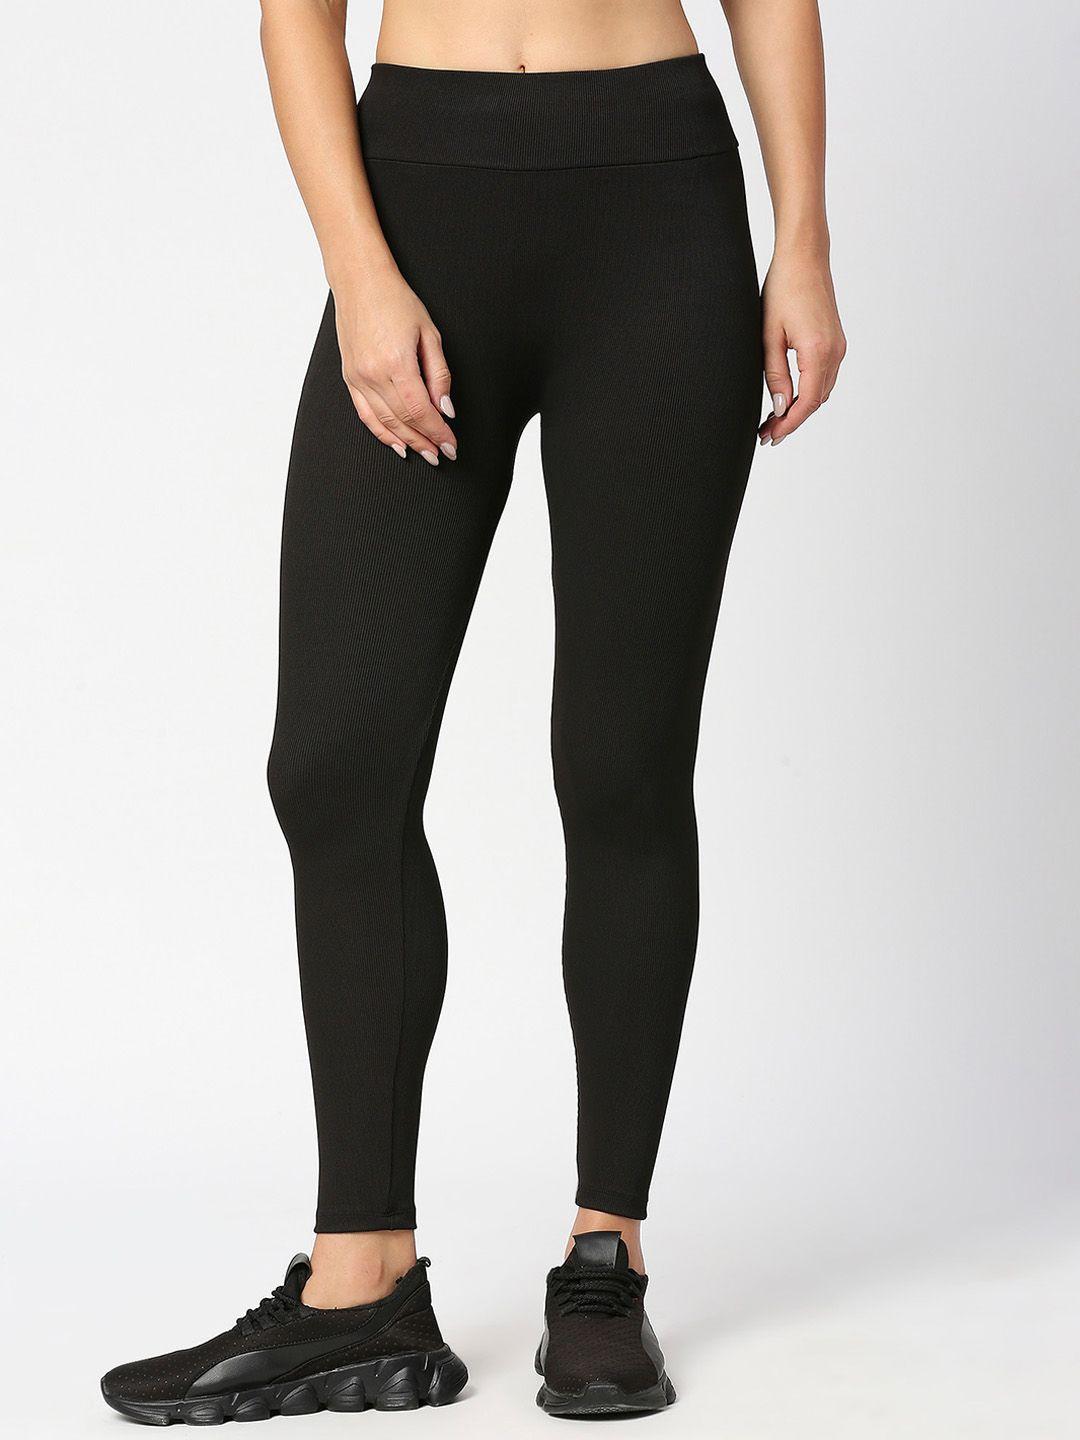 laasa-sports-high-rise-dry-fit-tights